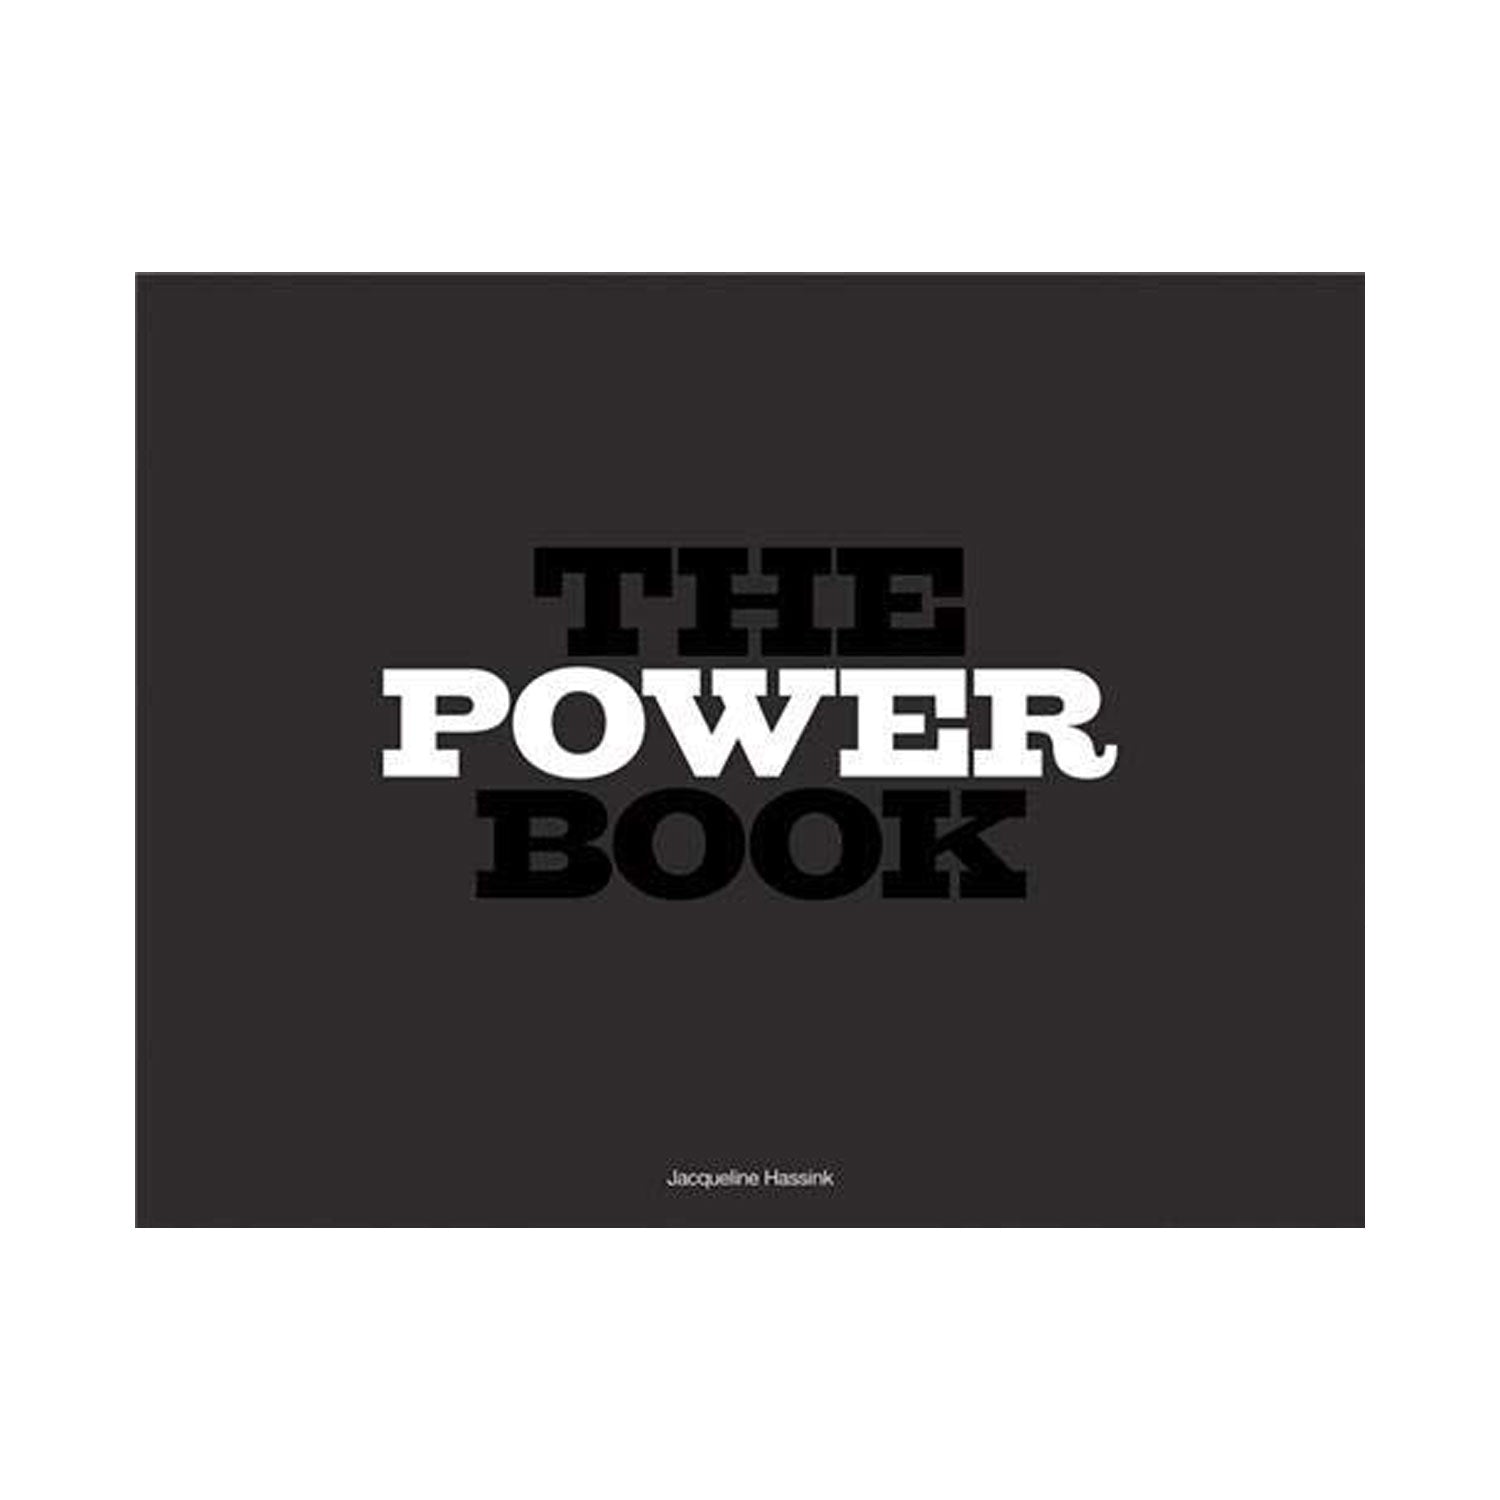 The Power Book by Jacqueline Hassink Photo Museum Ireland